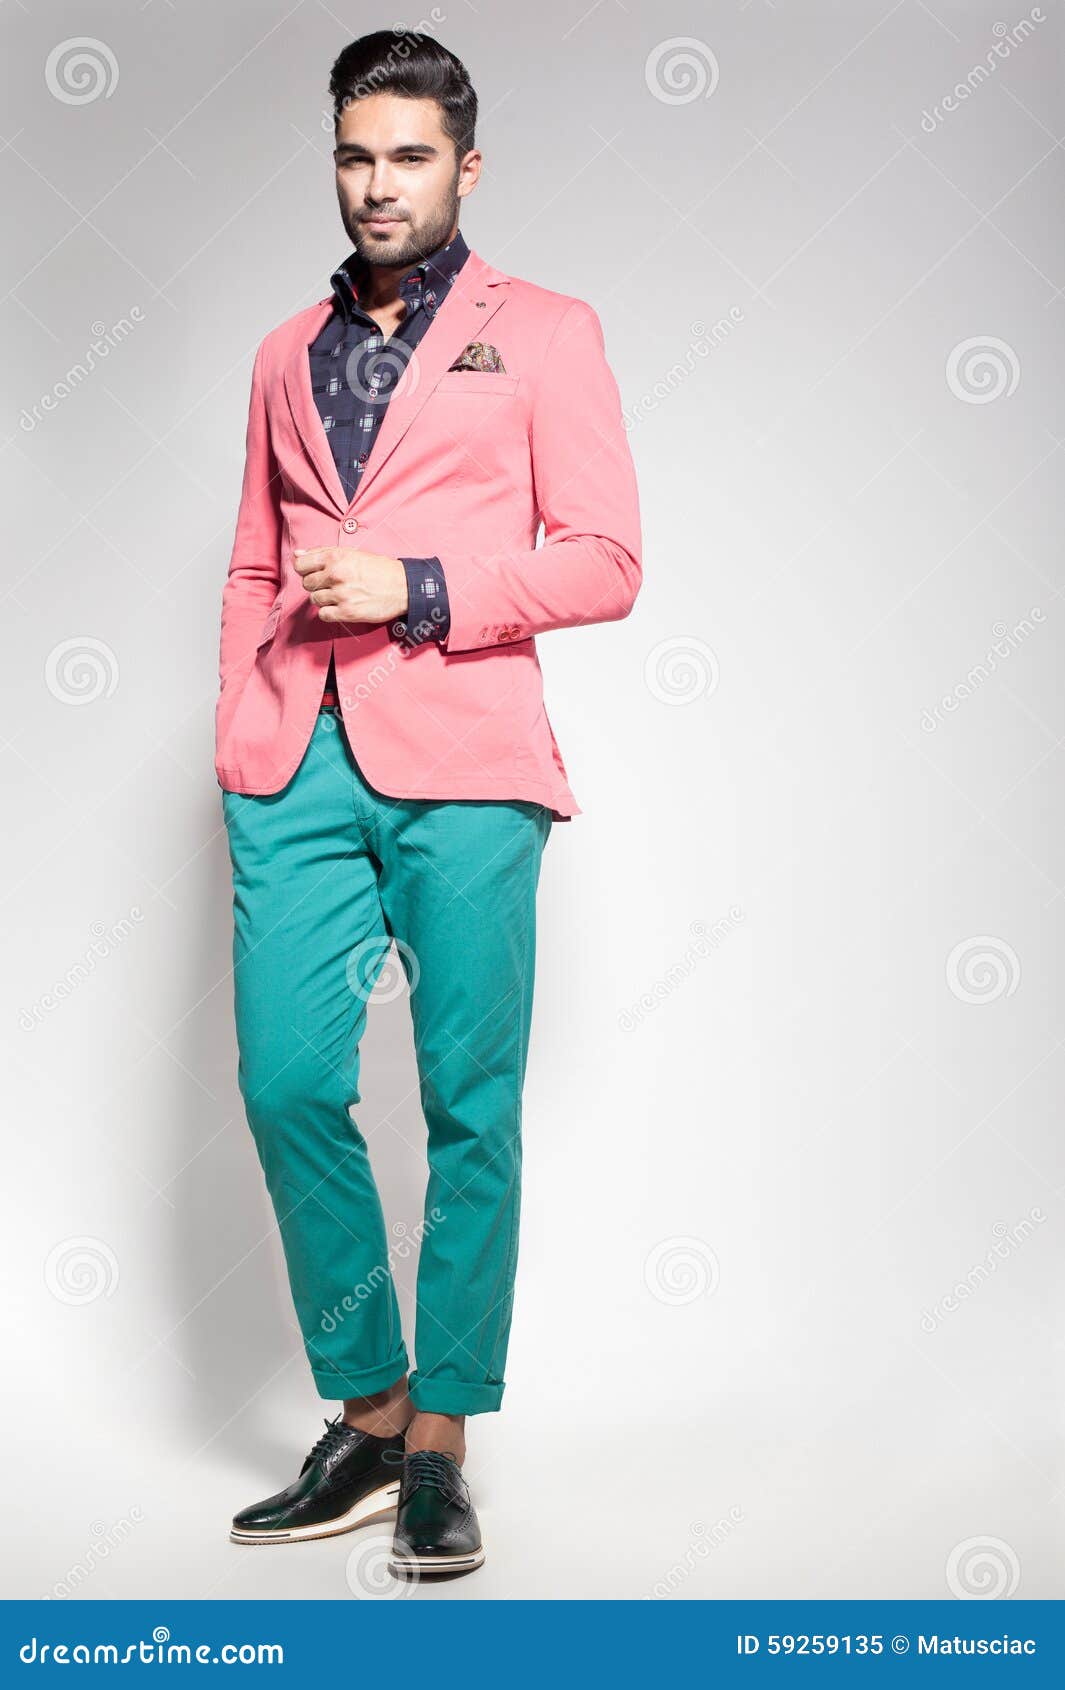 Attractive Fashion Male Model Dressed Elegant - Casual Posing Against ...